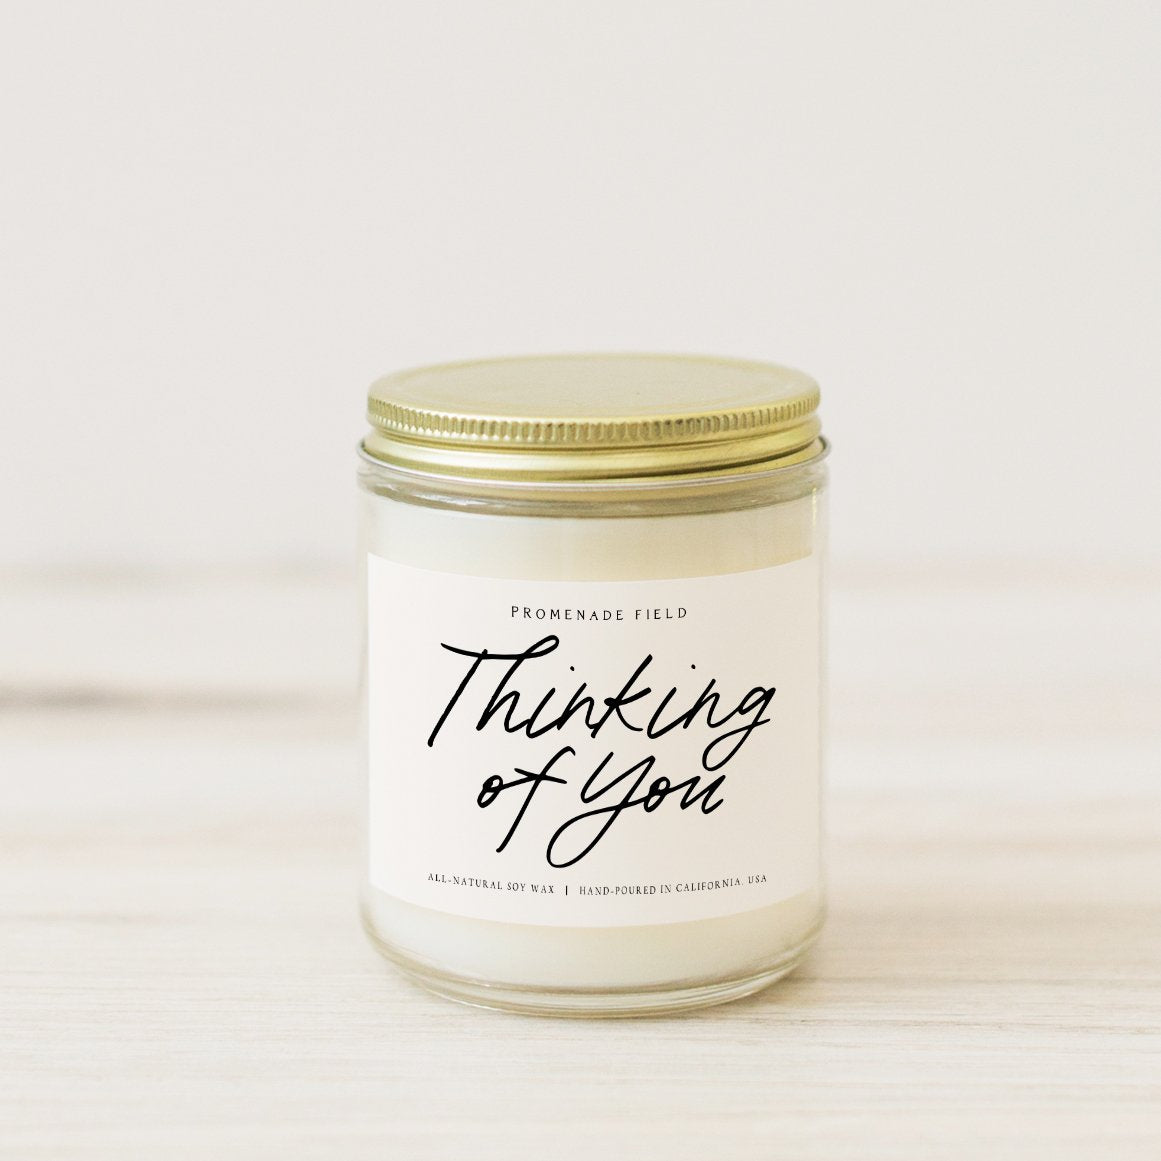 A beautiful and simple candle in a glass jar with a gold lid. Label reads "Thinking of You".